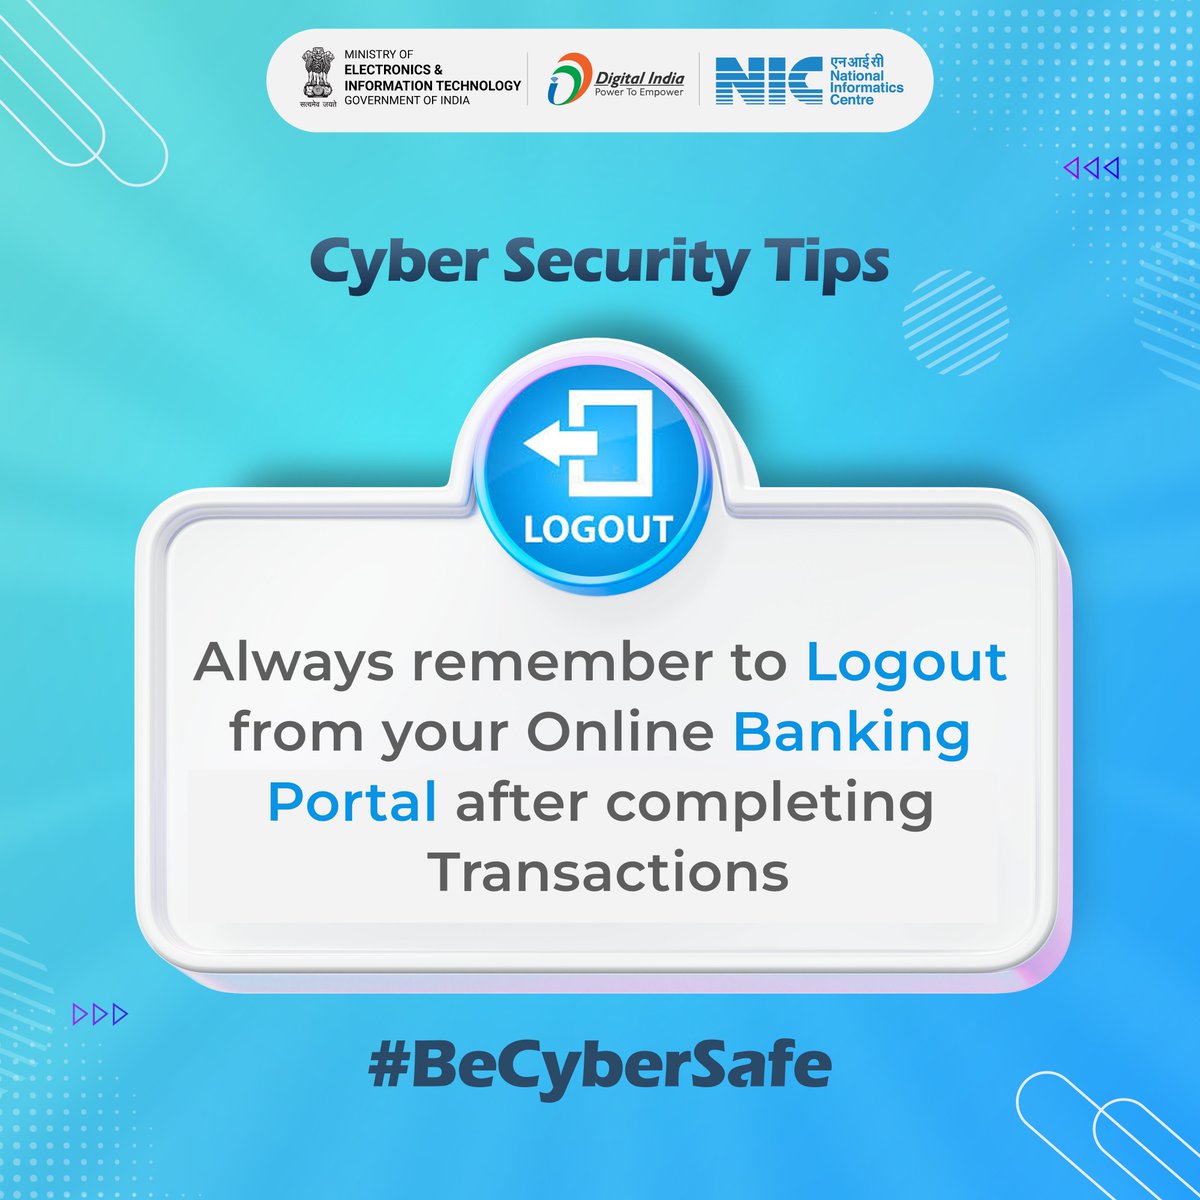 #CyberSecurityTips

Always remember to logout from your Online Banking Portal after completing Transactions.

Courtesy: @SSOIndia 
#NICMeitY #CyberSecurityAwareness #CyberSecurity #BeSafeOnline